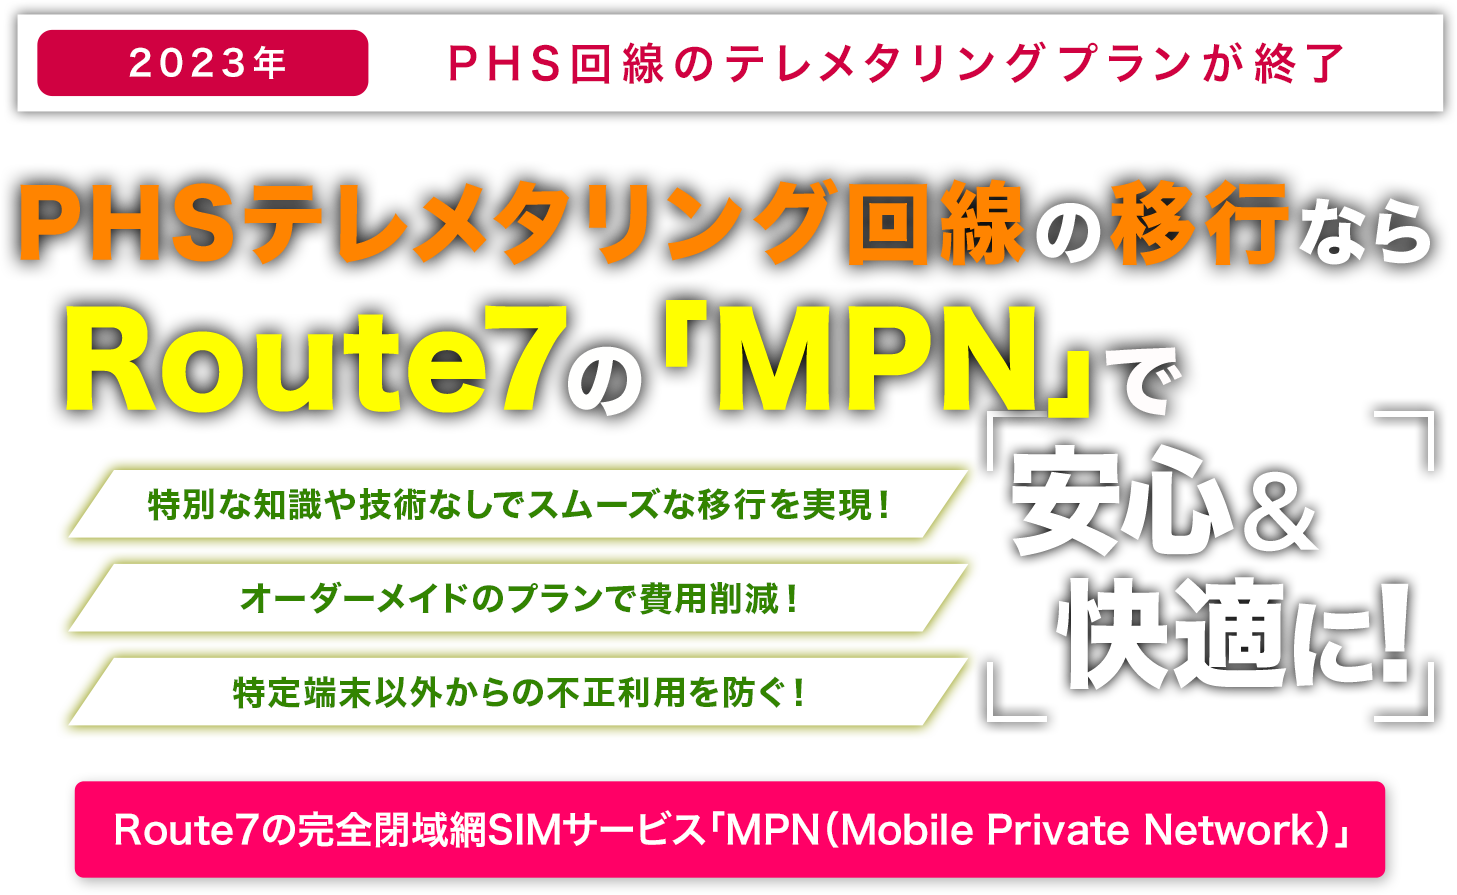 PHSテレメタリング回線の移行なら、Route7の「MPN（Mobile Private Network）」で安心&快適に！